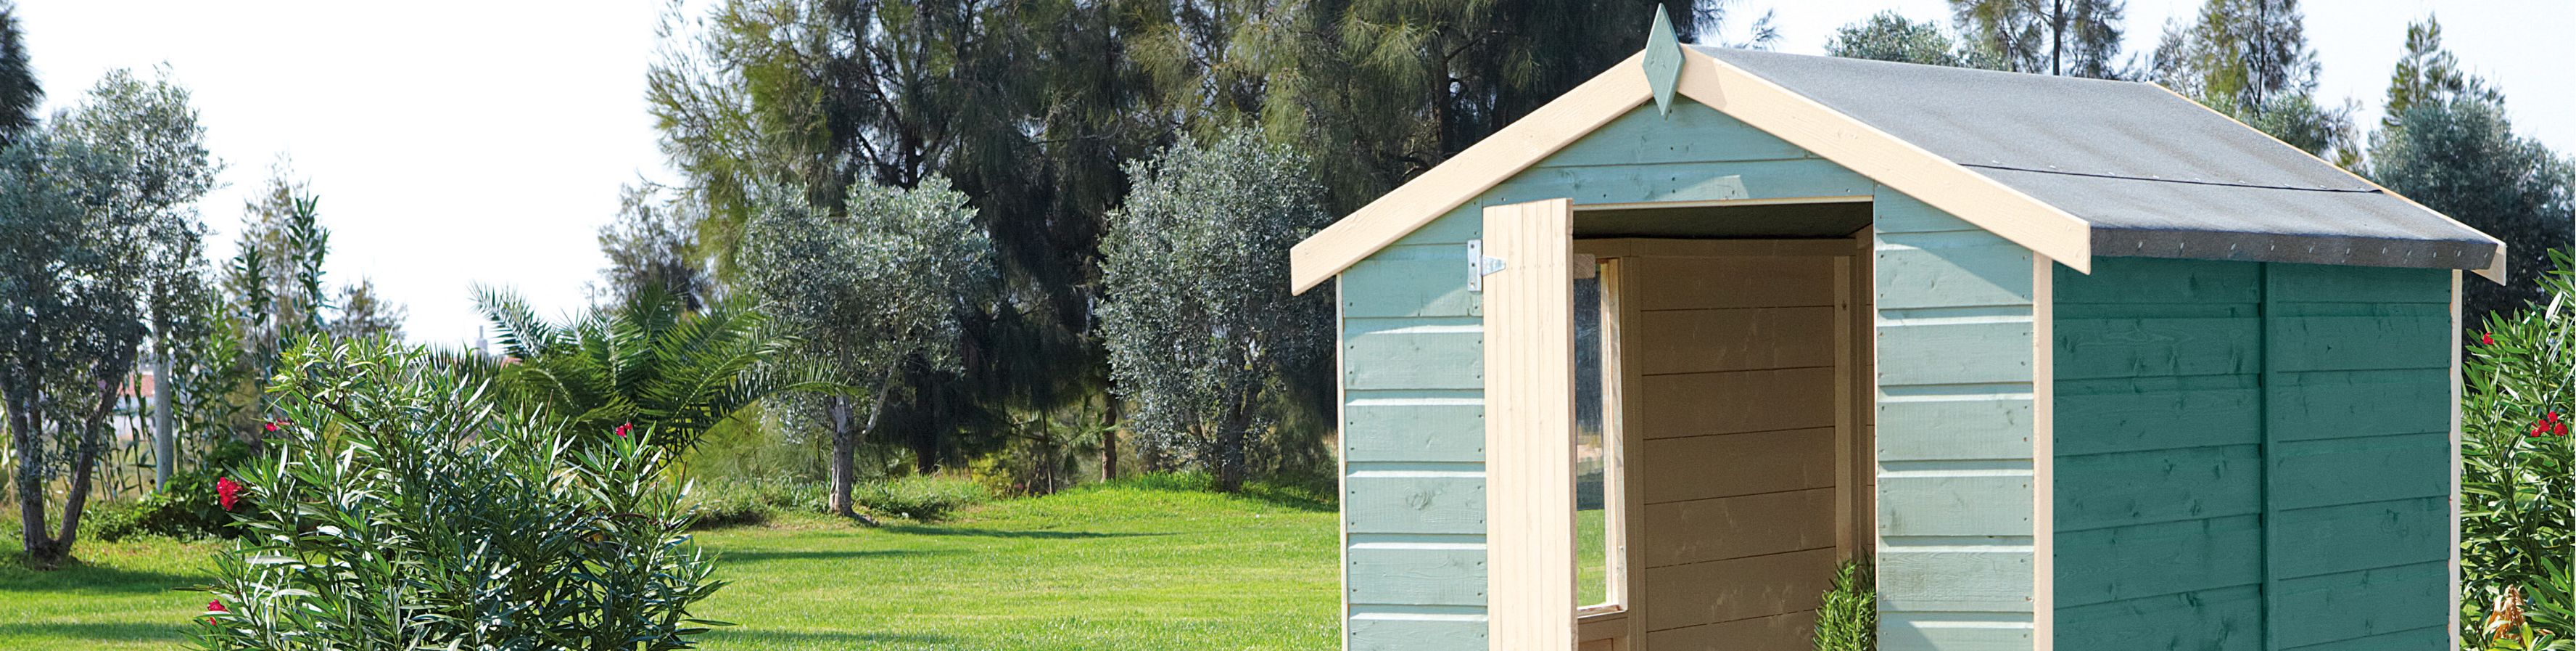 sheds and outbuildings can be placed almost anywhere as long as the ...